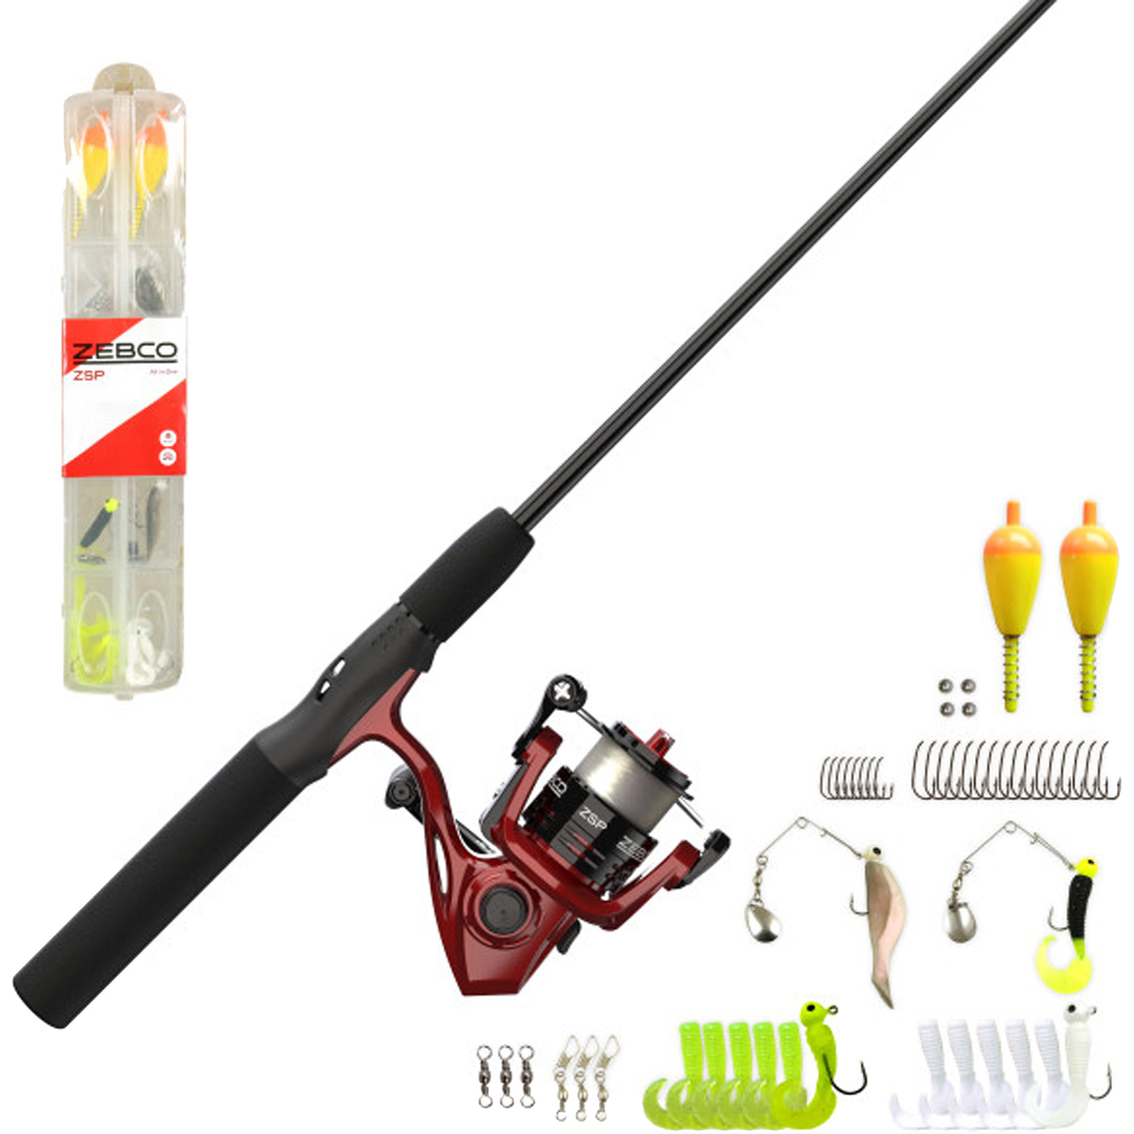 Zebco Zsp 20602ml Spinning Reel Combo Tackle 8